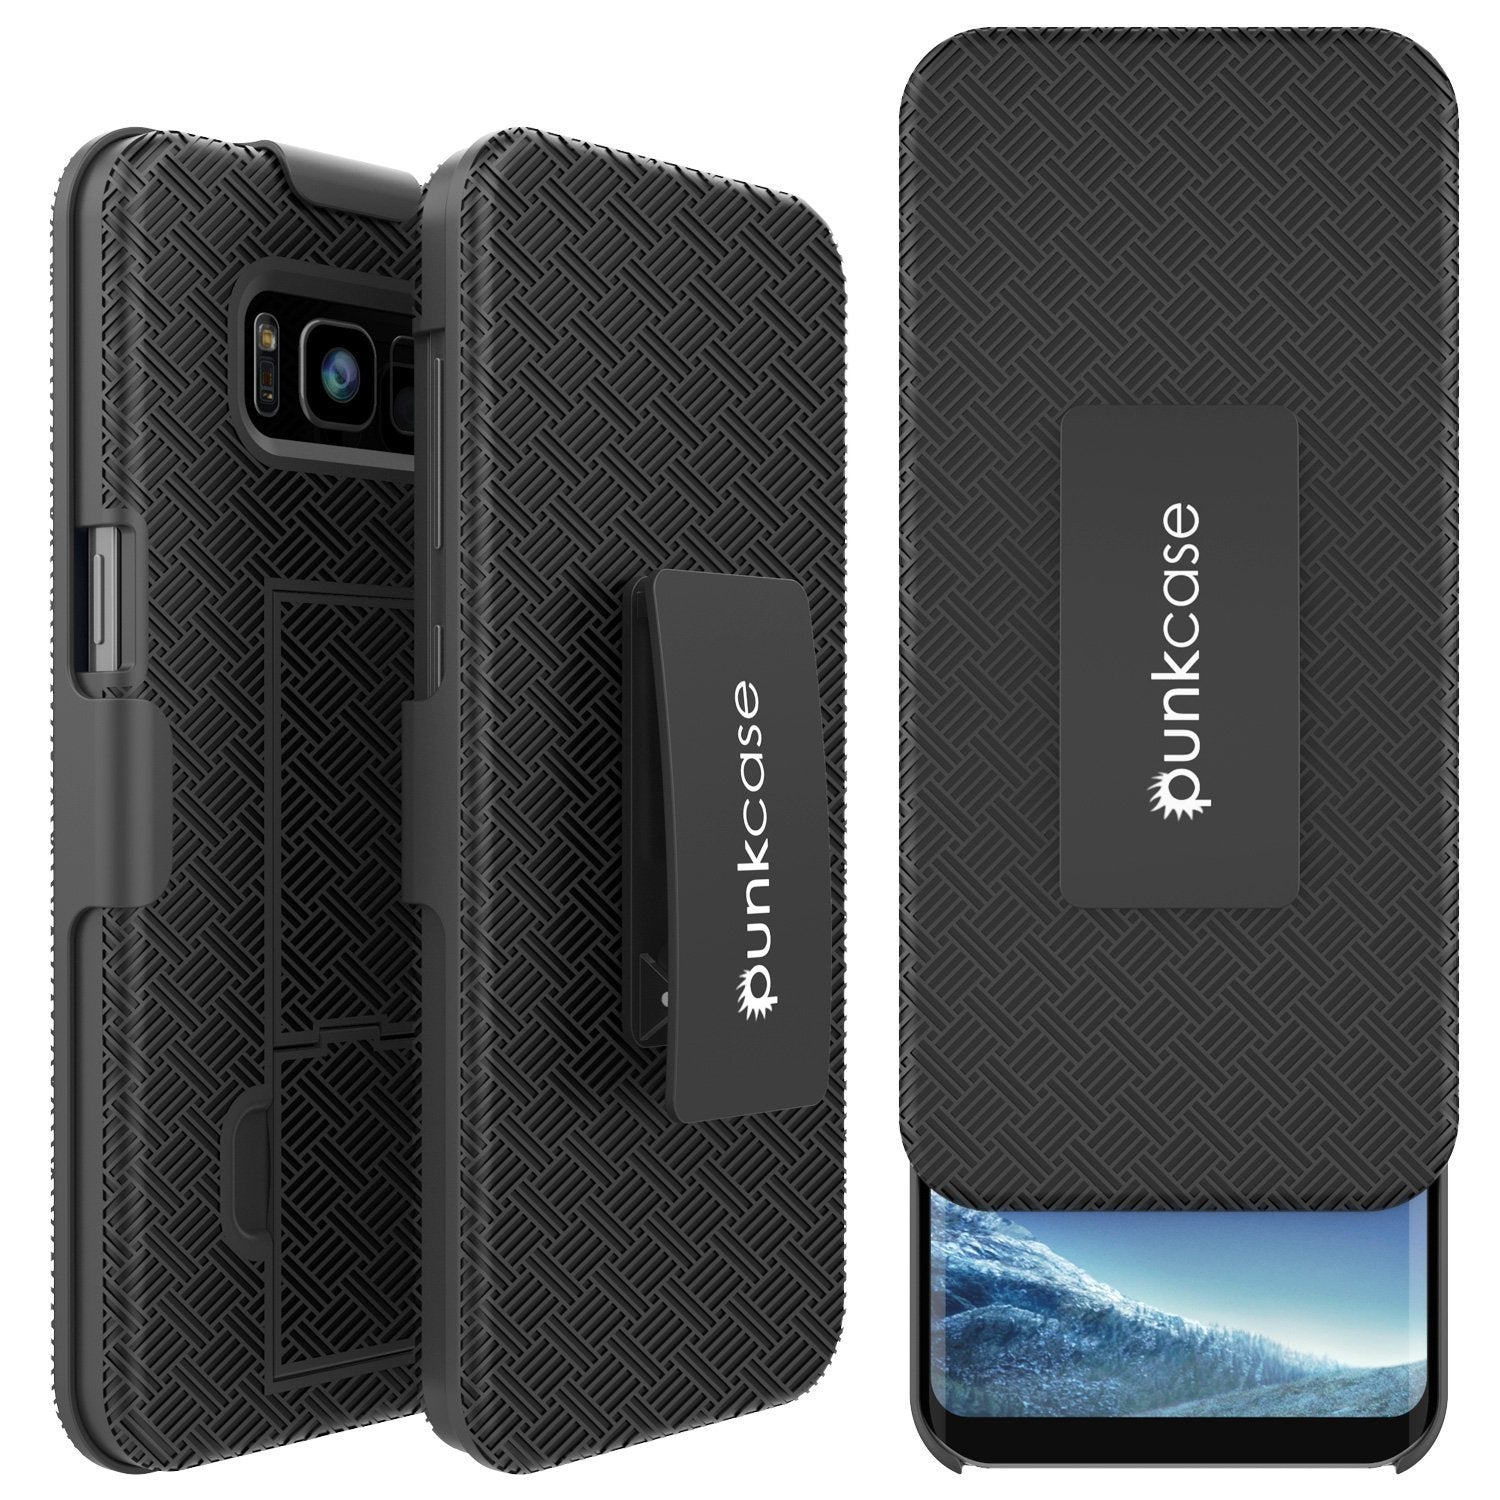 Punkcase Galaxy S8+ Plus Case, With PunkShield Glass Screen Protector, Holster Belt Clip & Built-In Kickstand Non-Slip Dual Layer Hybrid TPU Full Body Protection for Samsung S8 Plus Edge [Black]